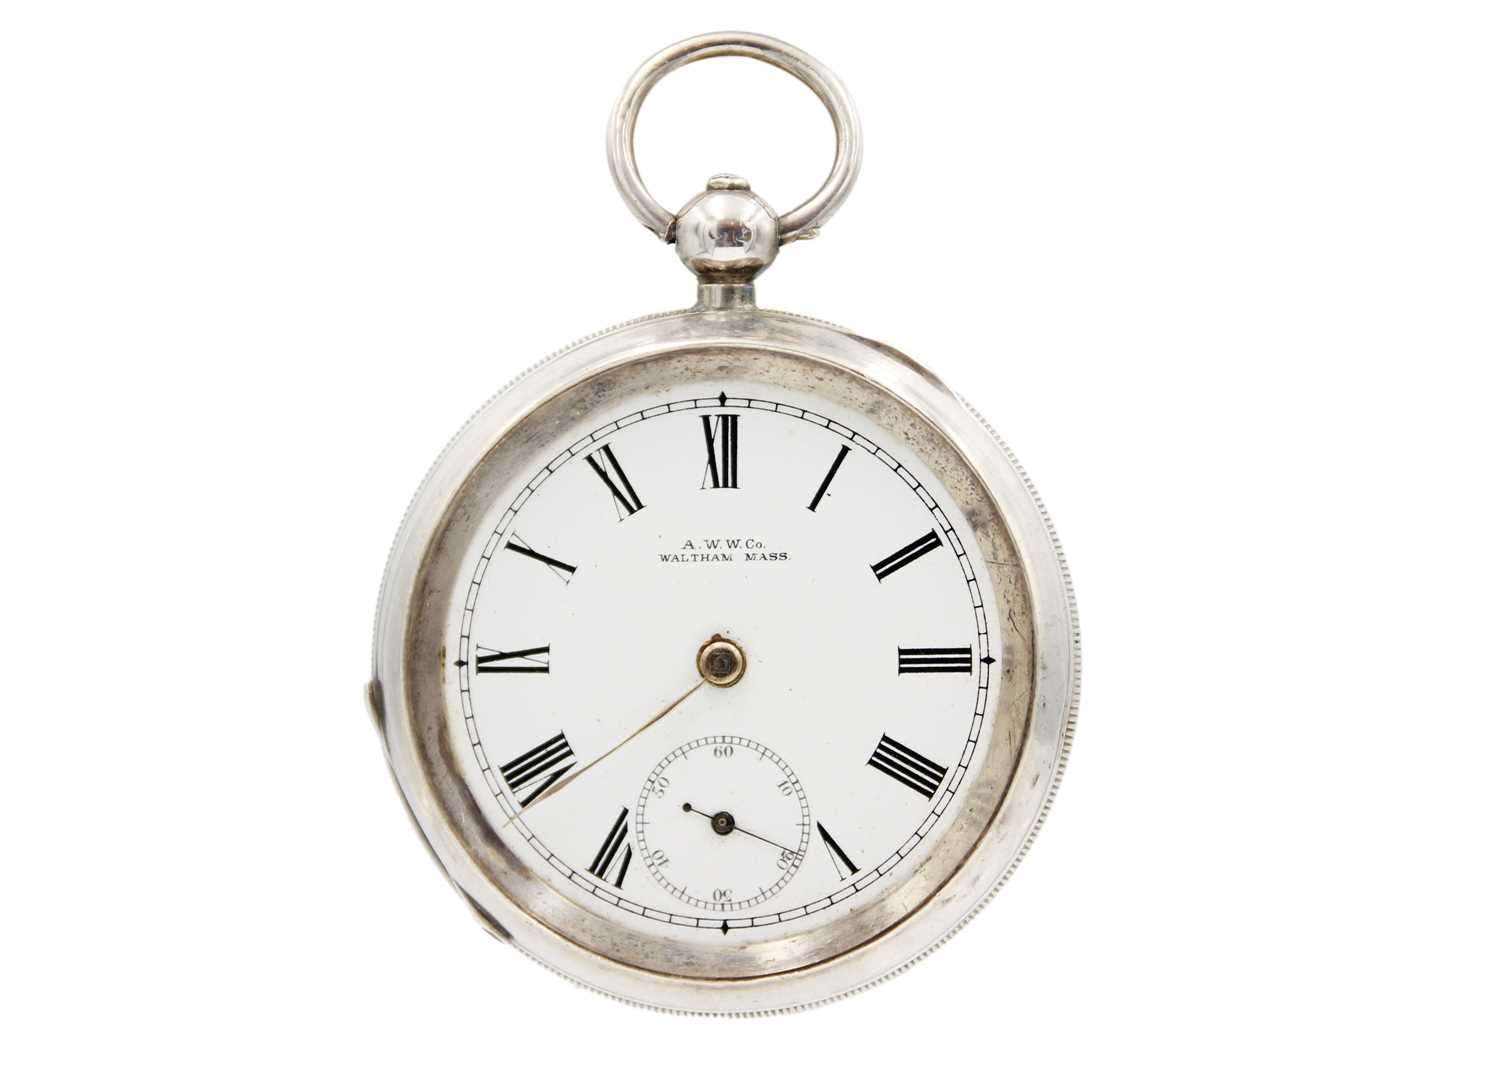 Two American Watch Co. Waltham silver-cased key wind pocket watches. - Image 2 of 7